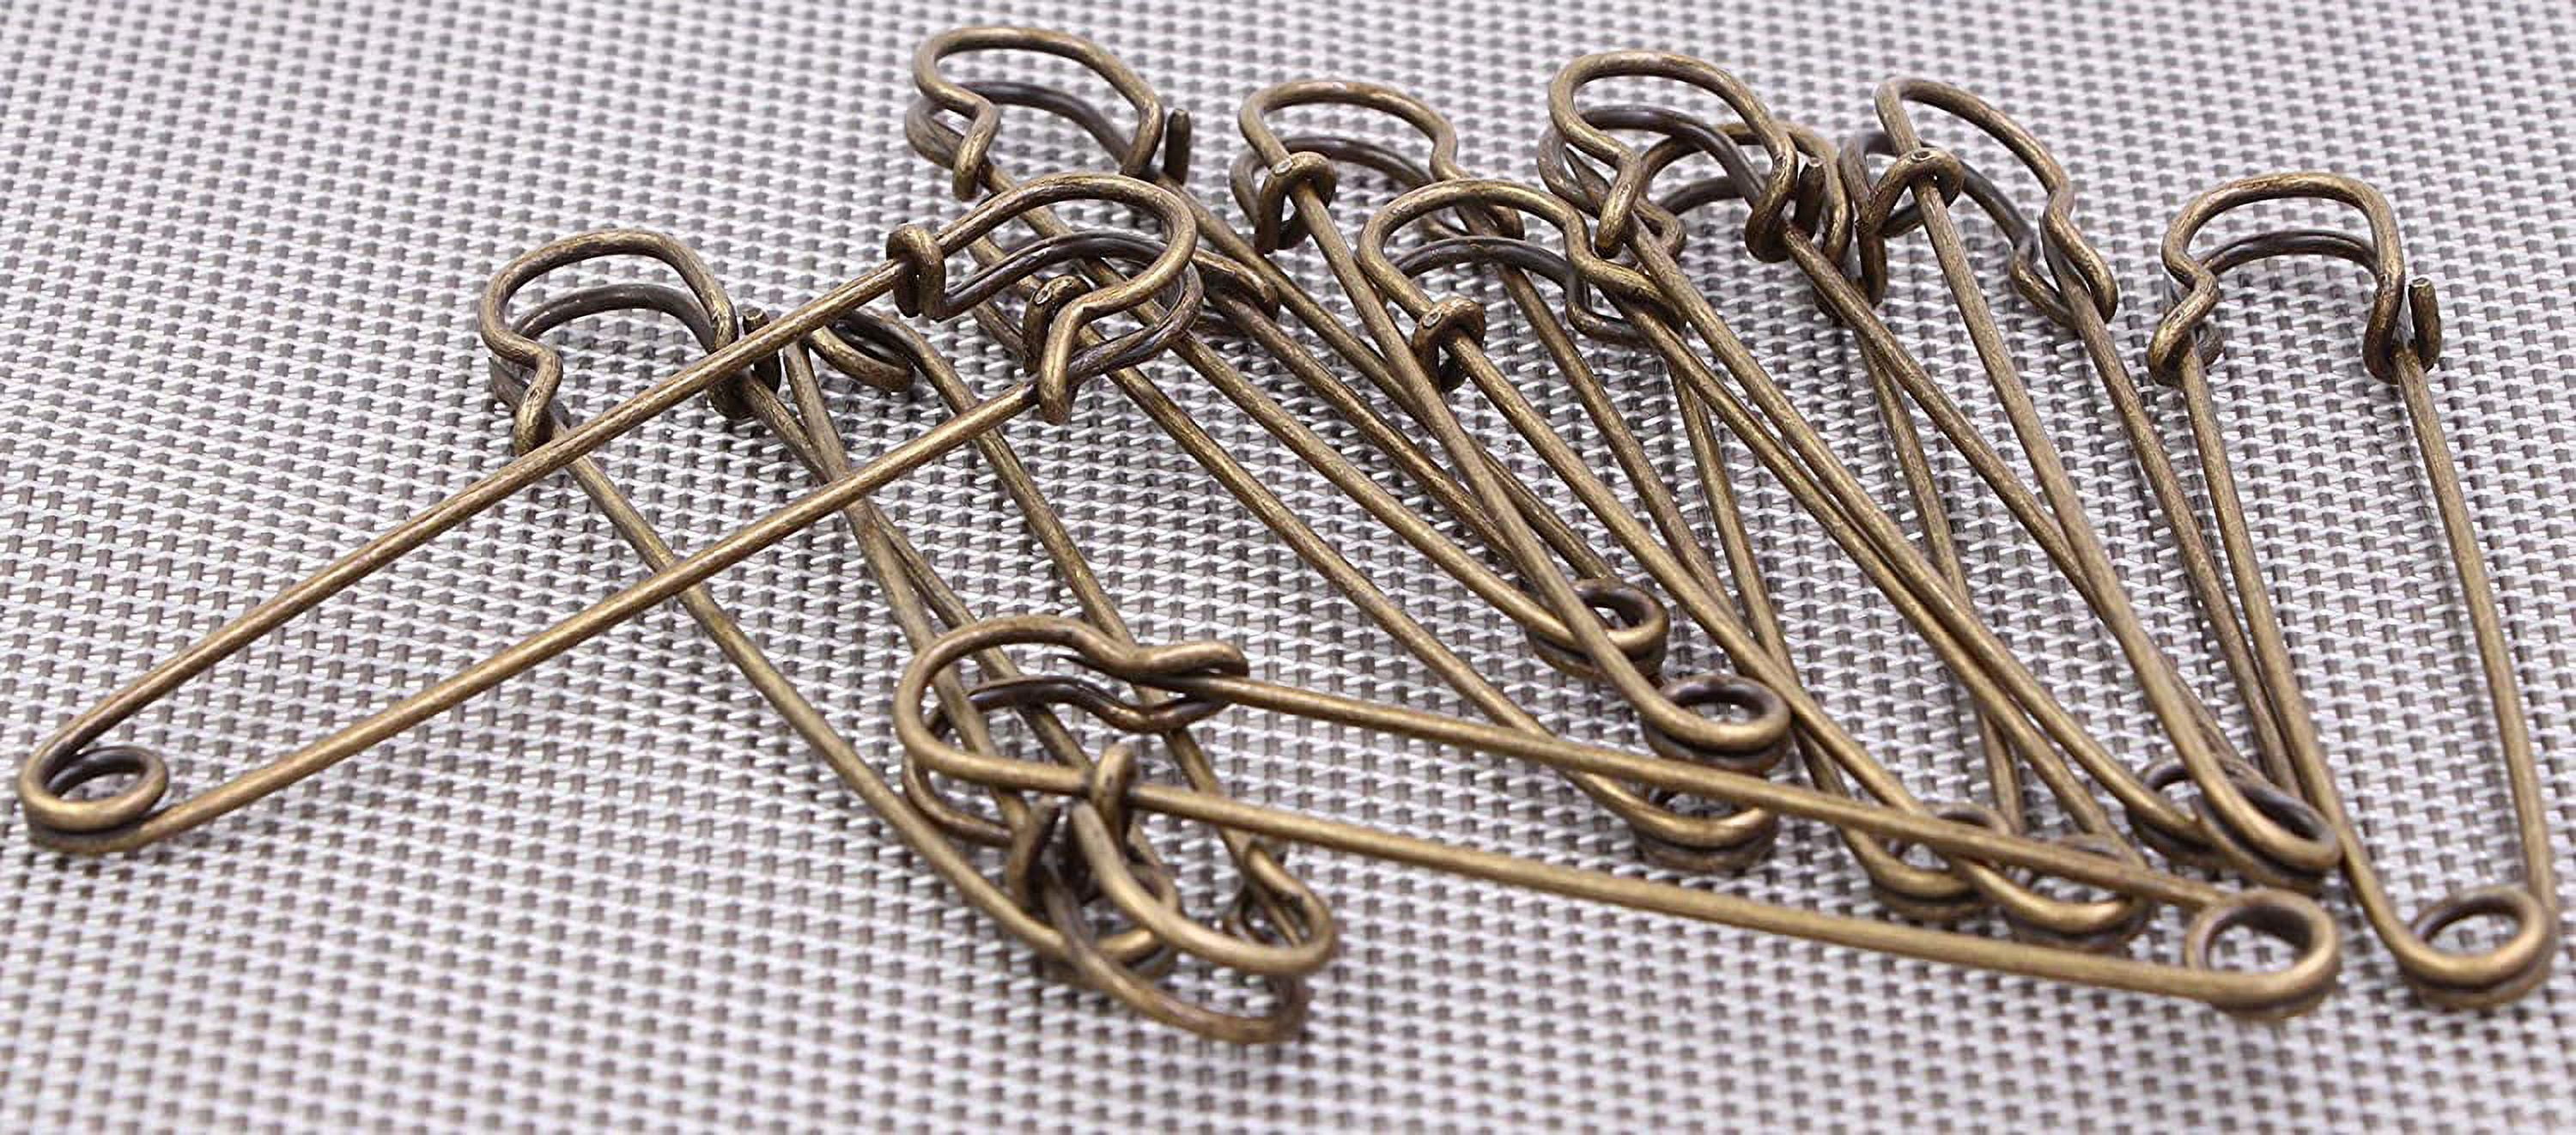  Bleiou 50 Pcs Safety Pins Heavy Duty Large Safety Pins